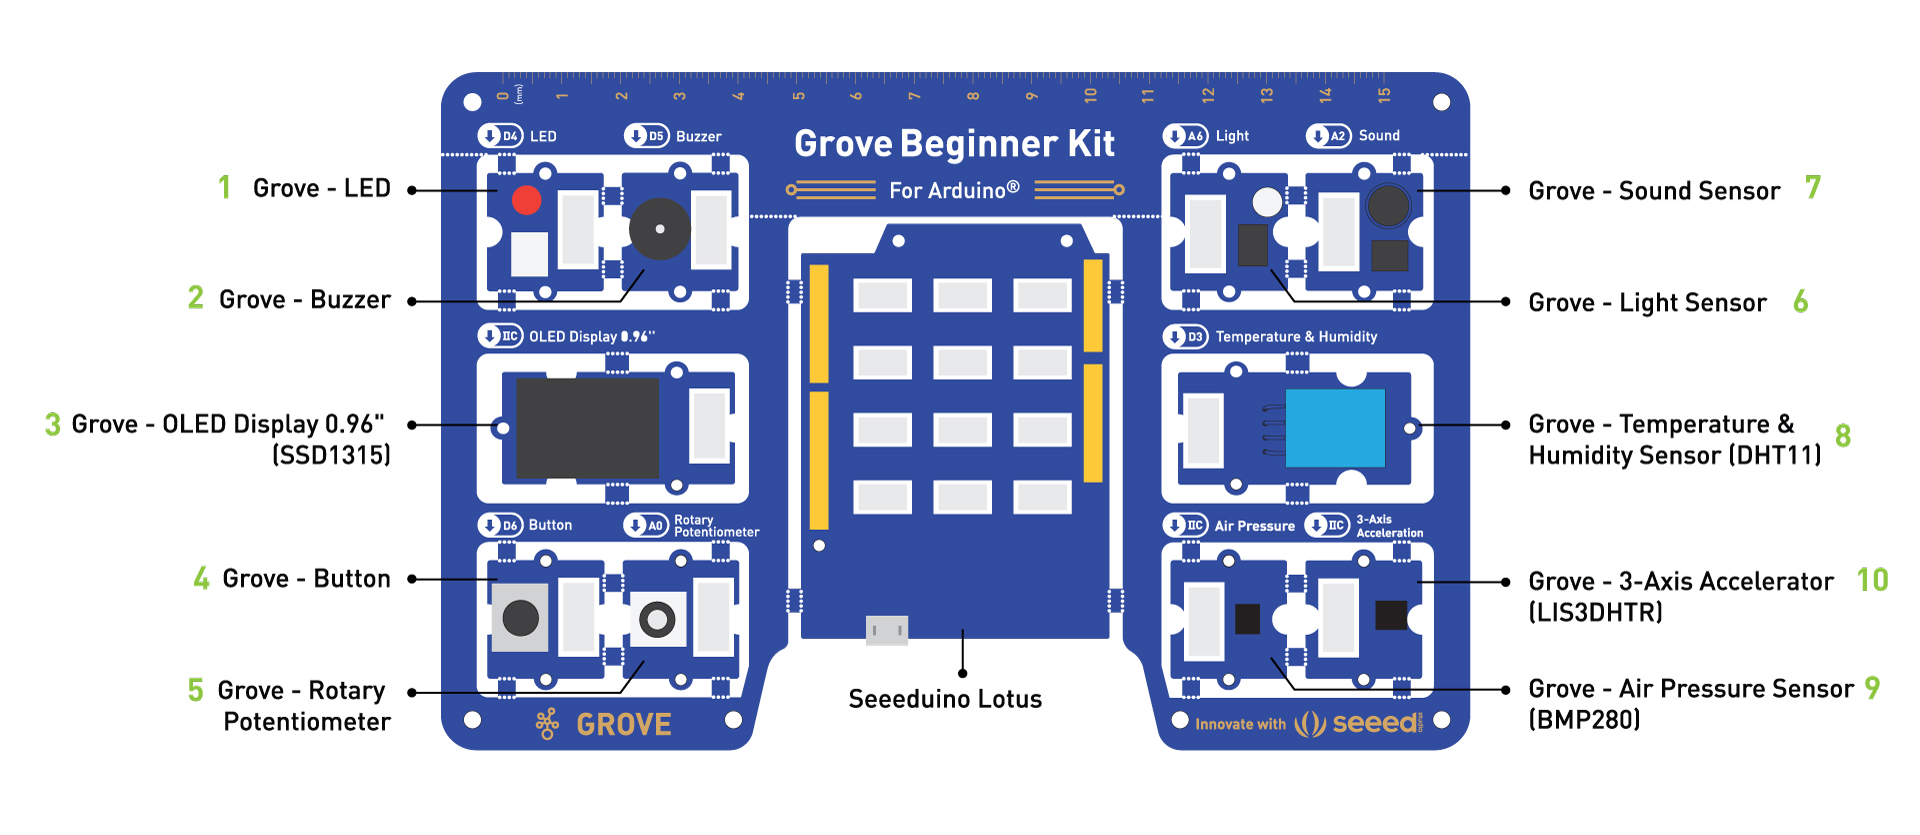 Seeed Launches an innovative All-in-one Grove Beginner Kit for Arduino